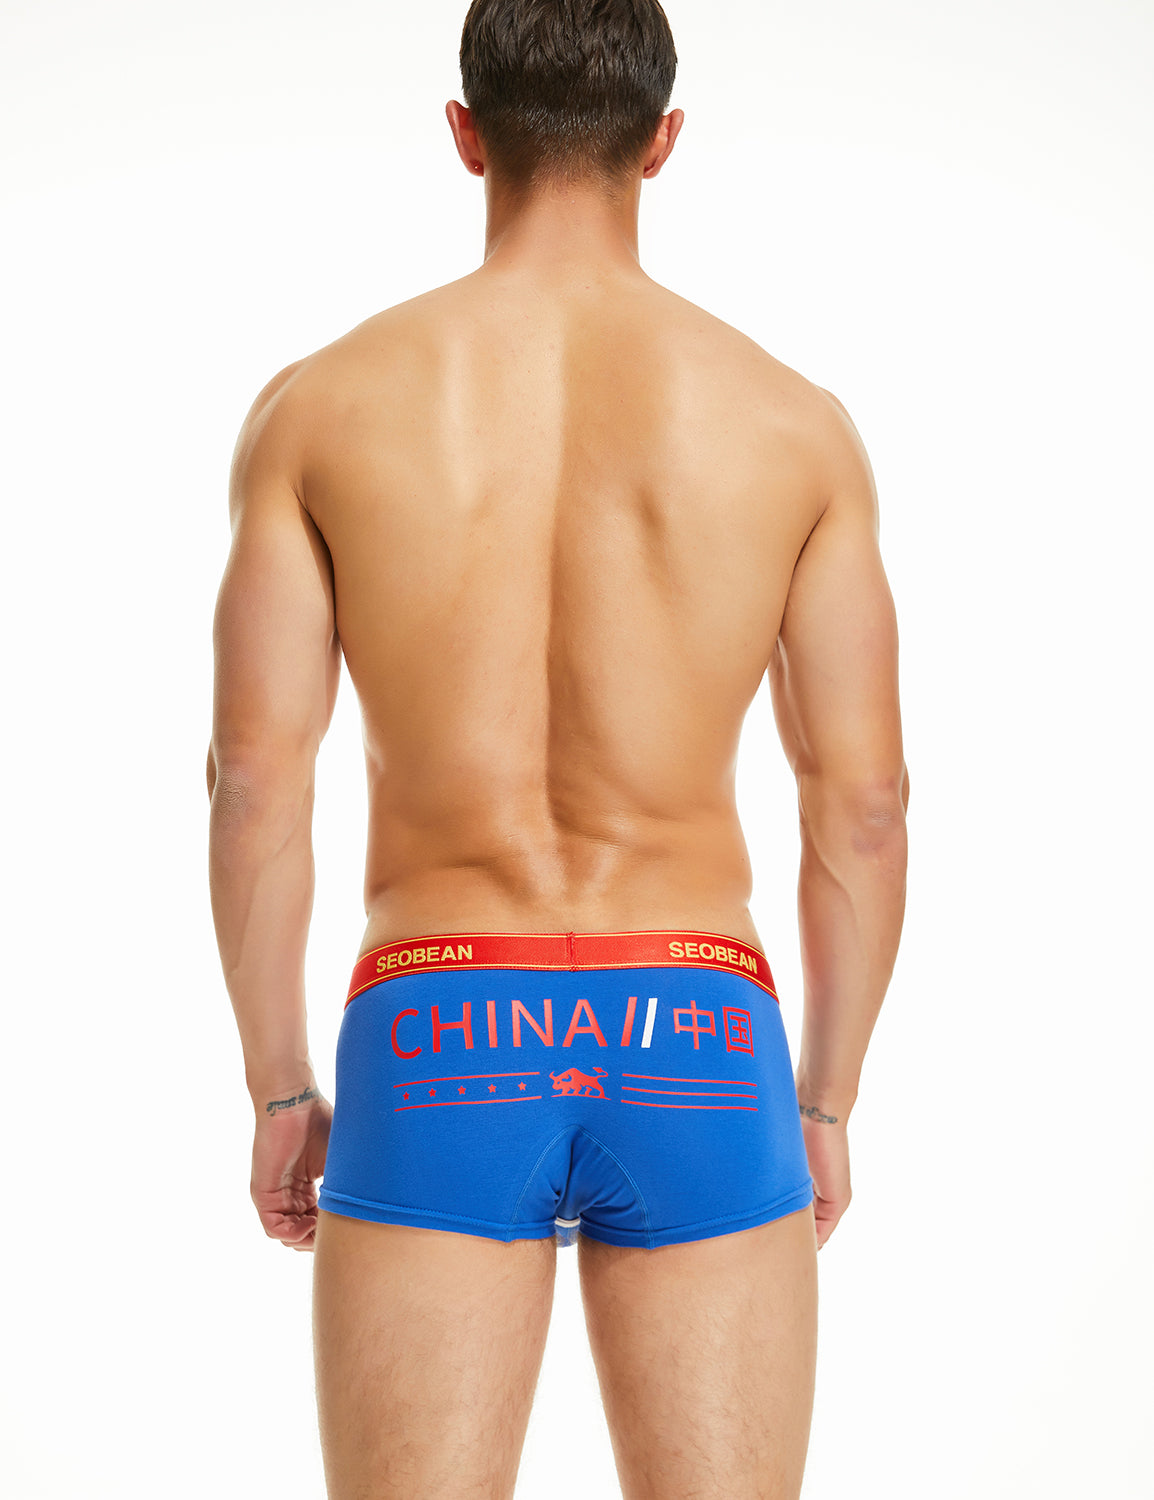 Outlet Shop For Kids - Our latest BONDS men's underwear sale continues.  Lots of new styles now available including these cute new Pride print.  Prices from $7.99, save up to 68% off